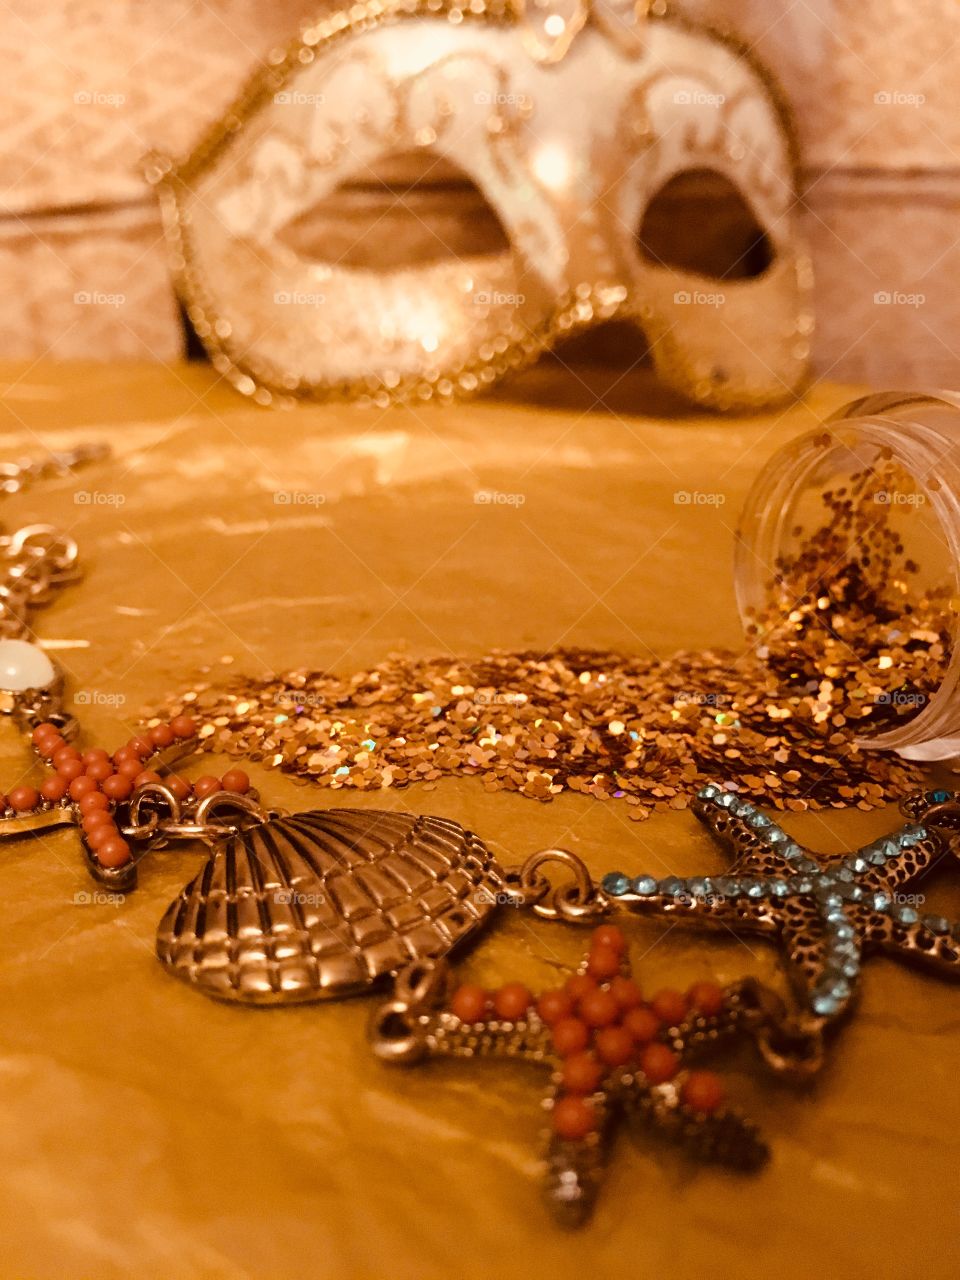 Seashore themed gold necklace with shells and starfish with spilled gold glitter and Venetian masquerade mask 